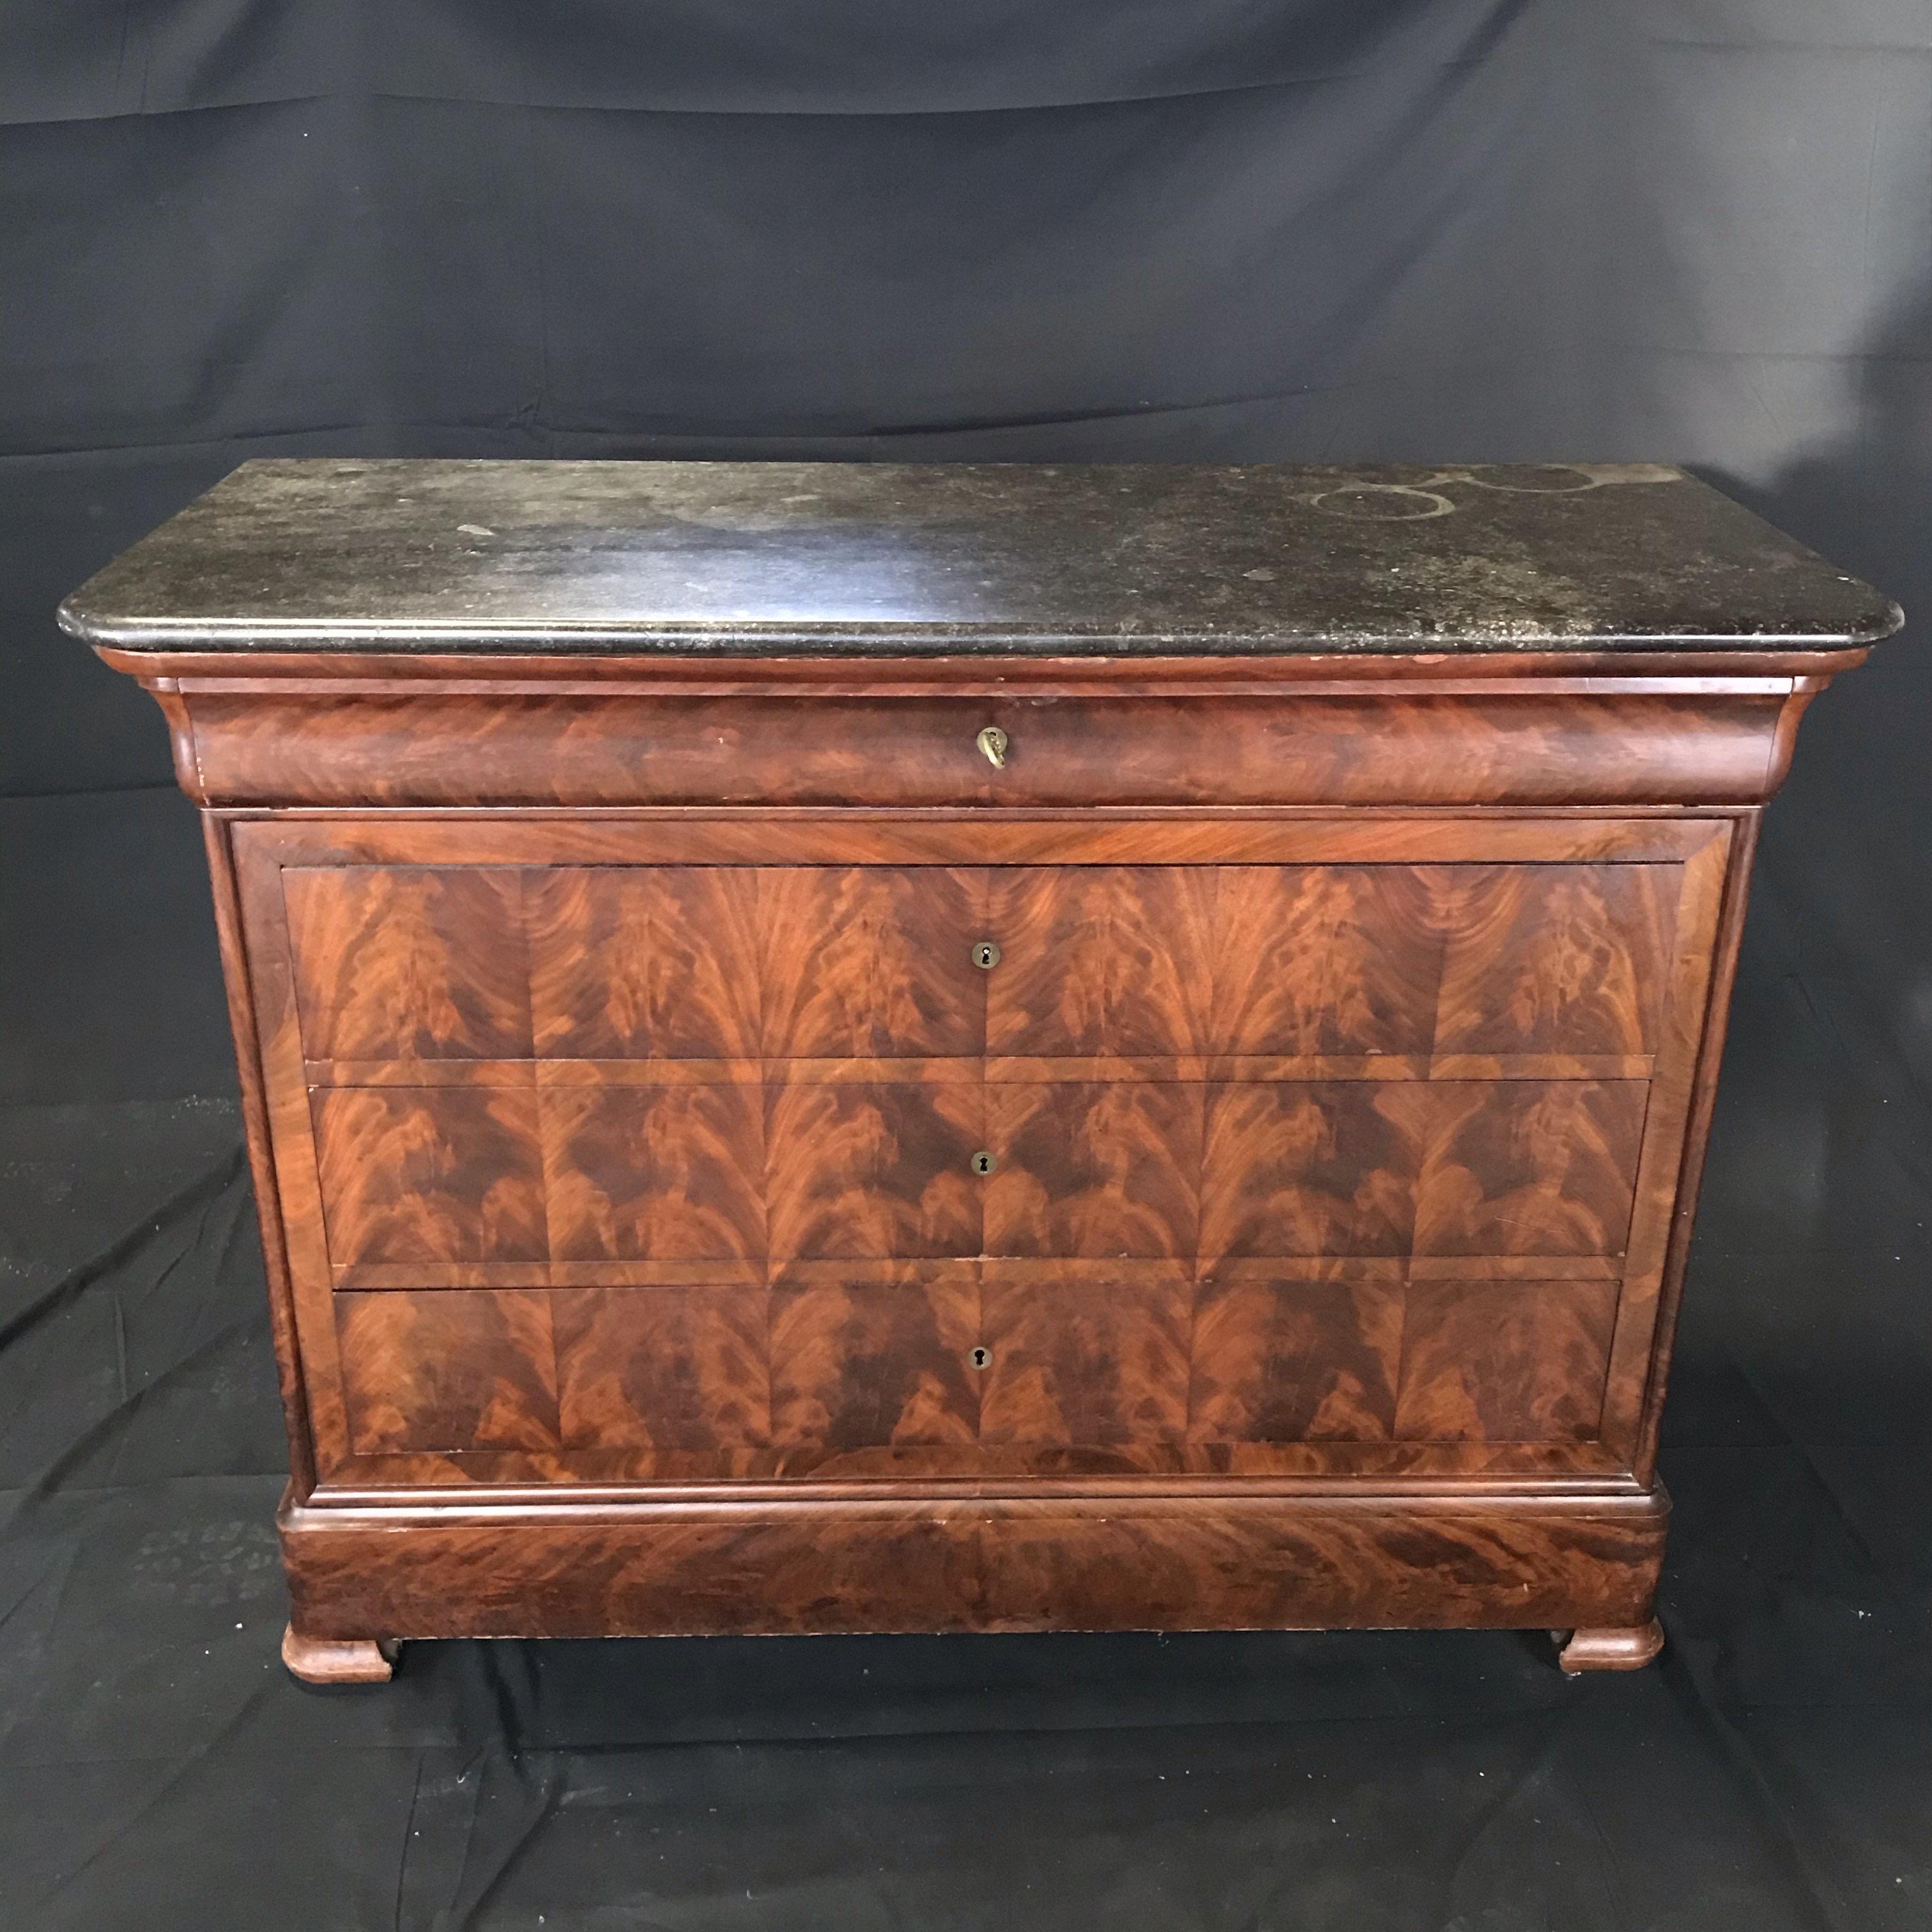 Gorgeous French Empire period commode having five drawers - top drawer with compartments, 3 large drawers for storage, and bottom secret drawer! Key opens drawers.
Top is black and grey marble.
#3483.